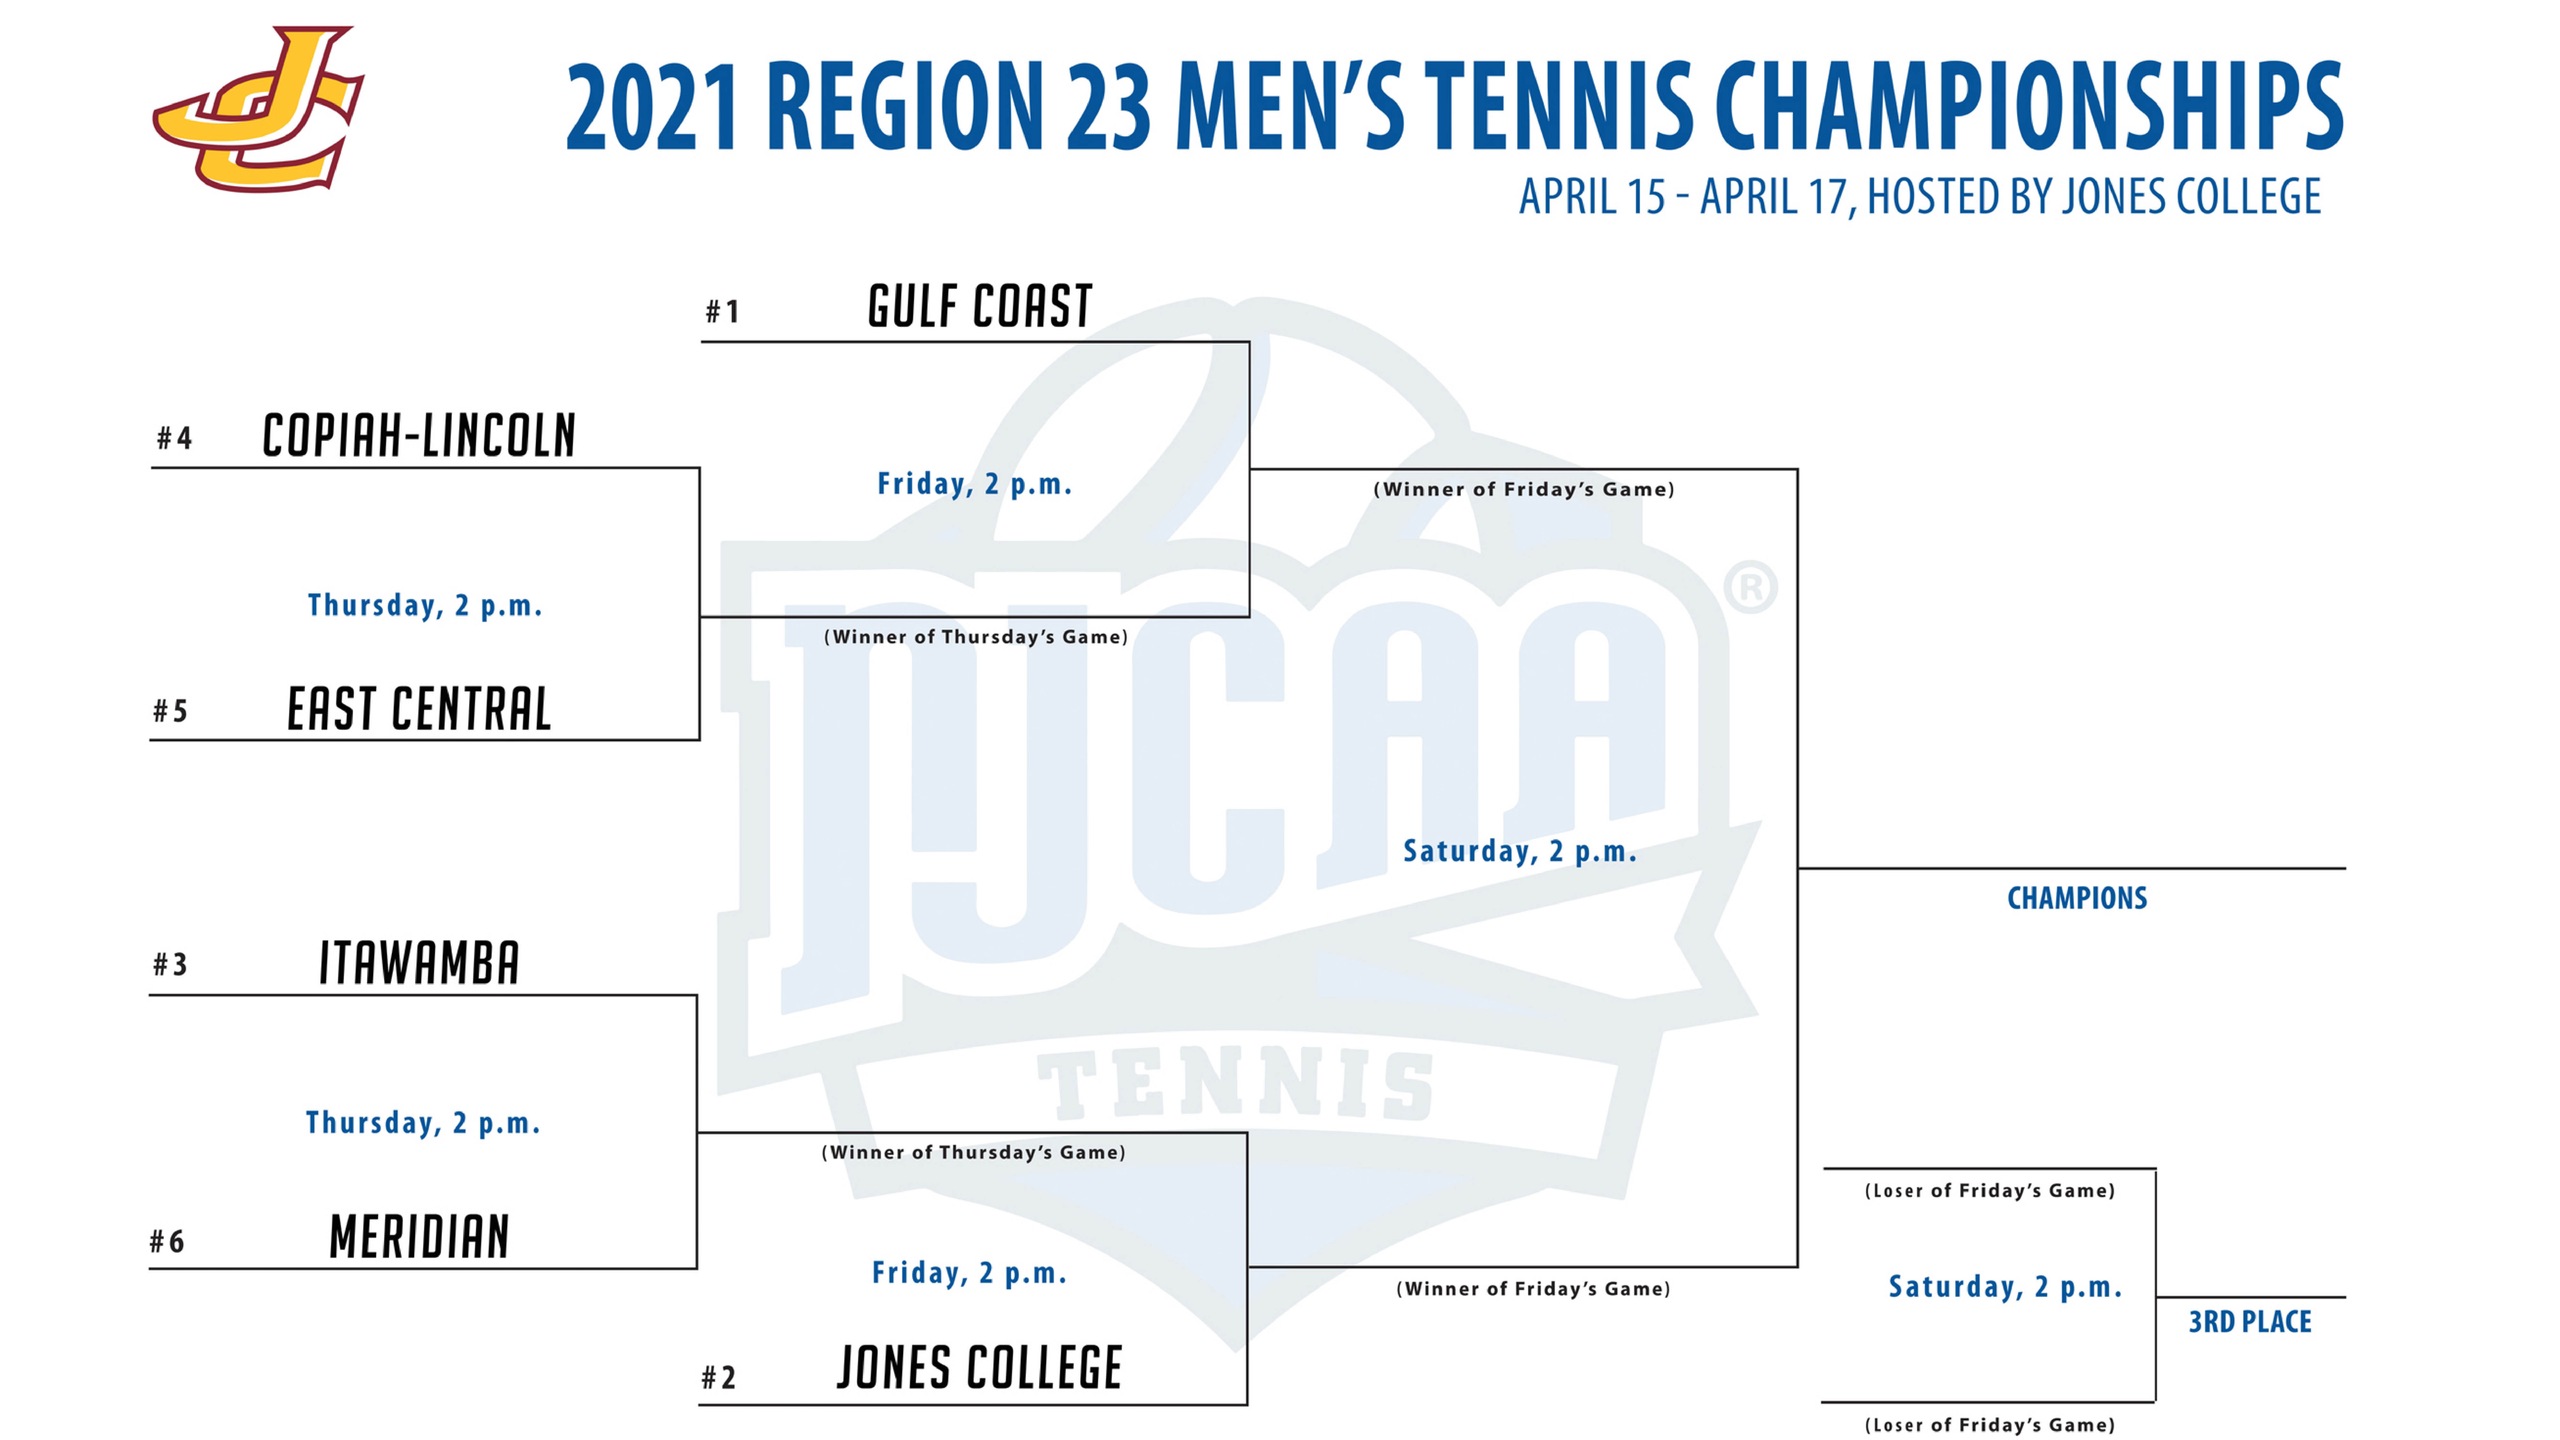 Bulldog Men are top seeds in R23 Tourney